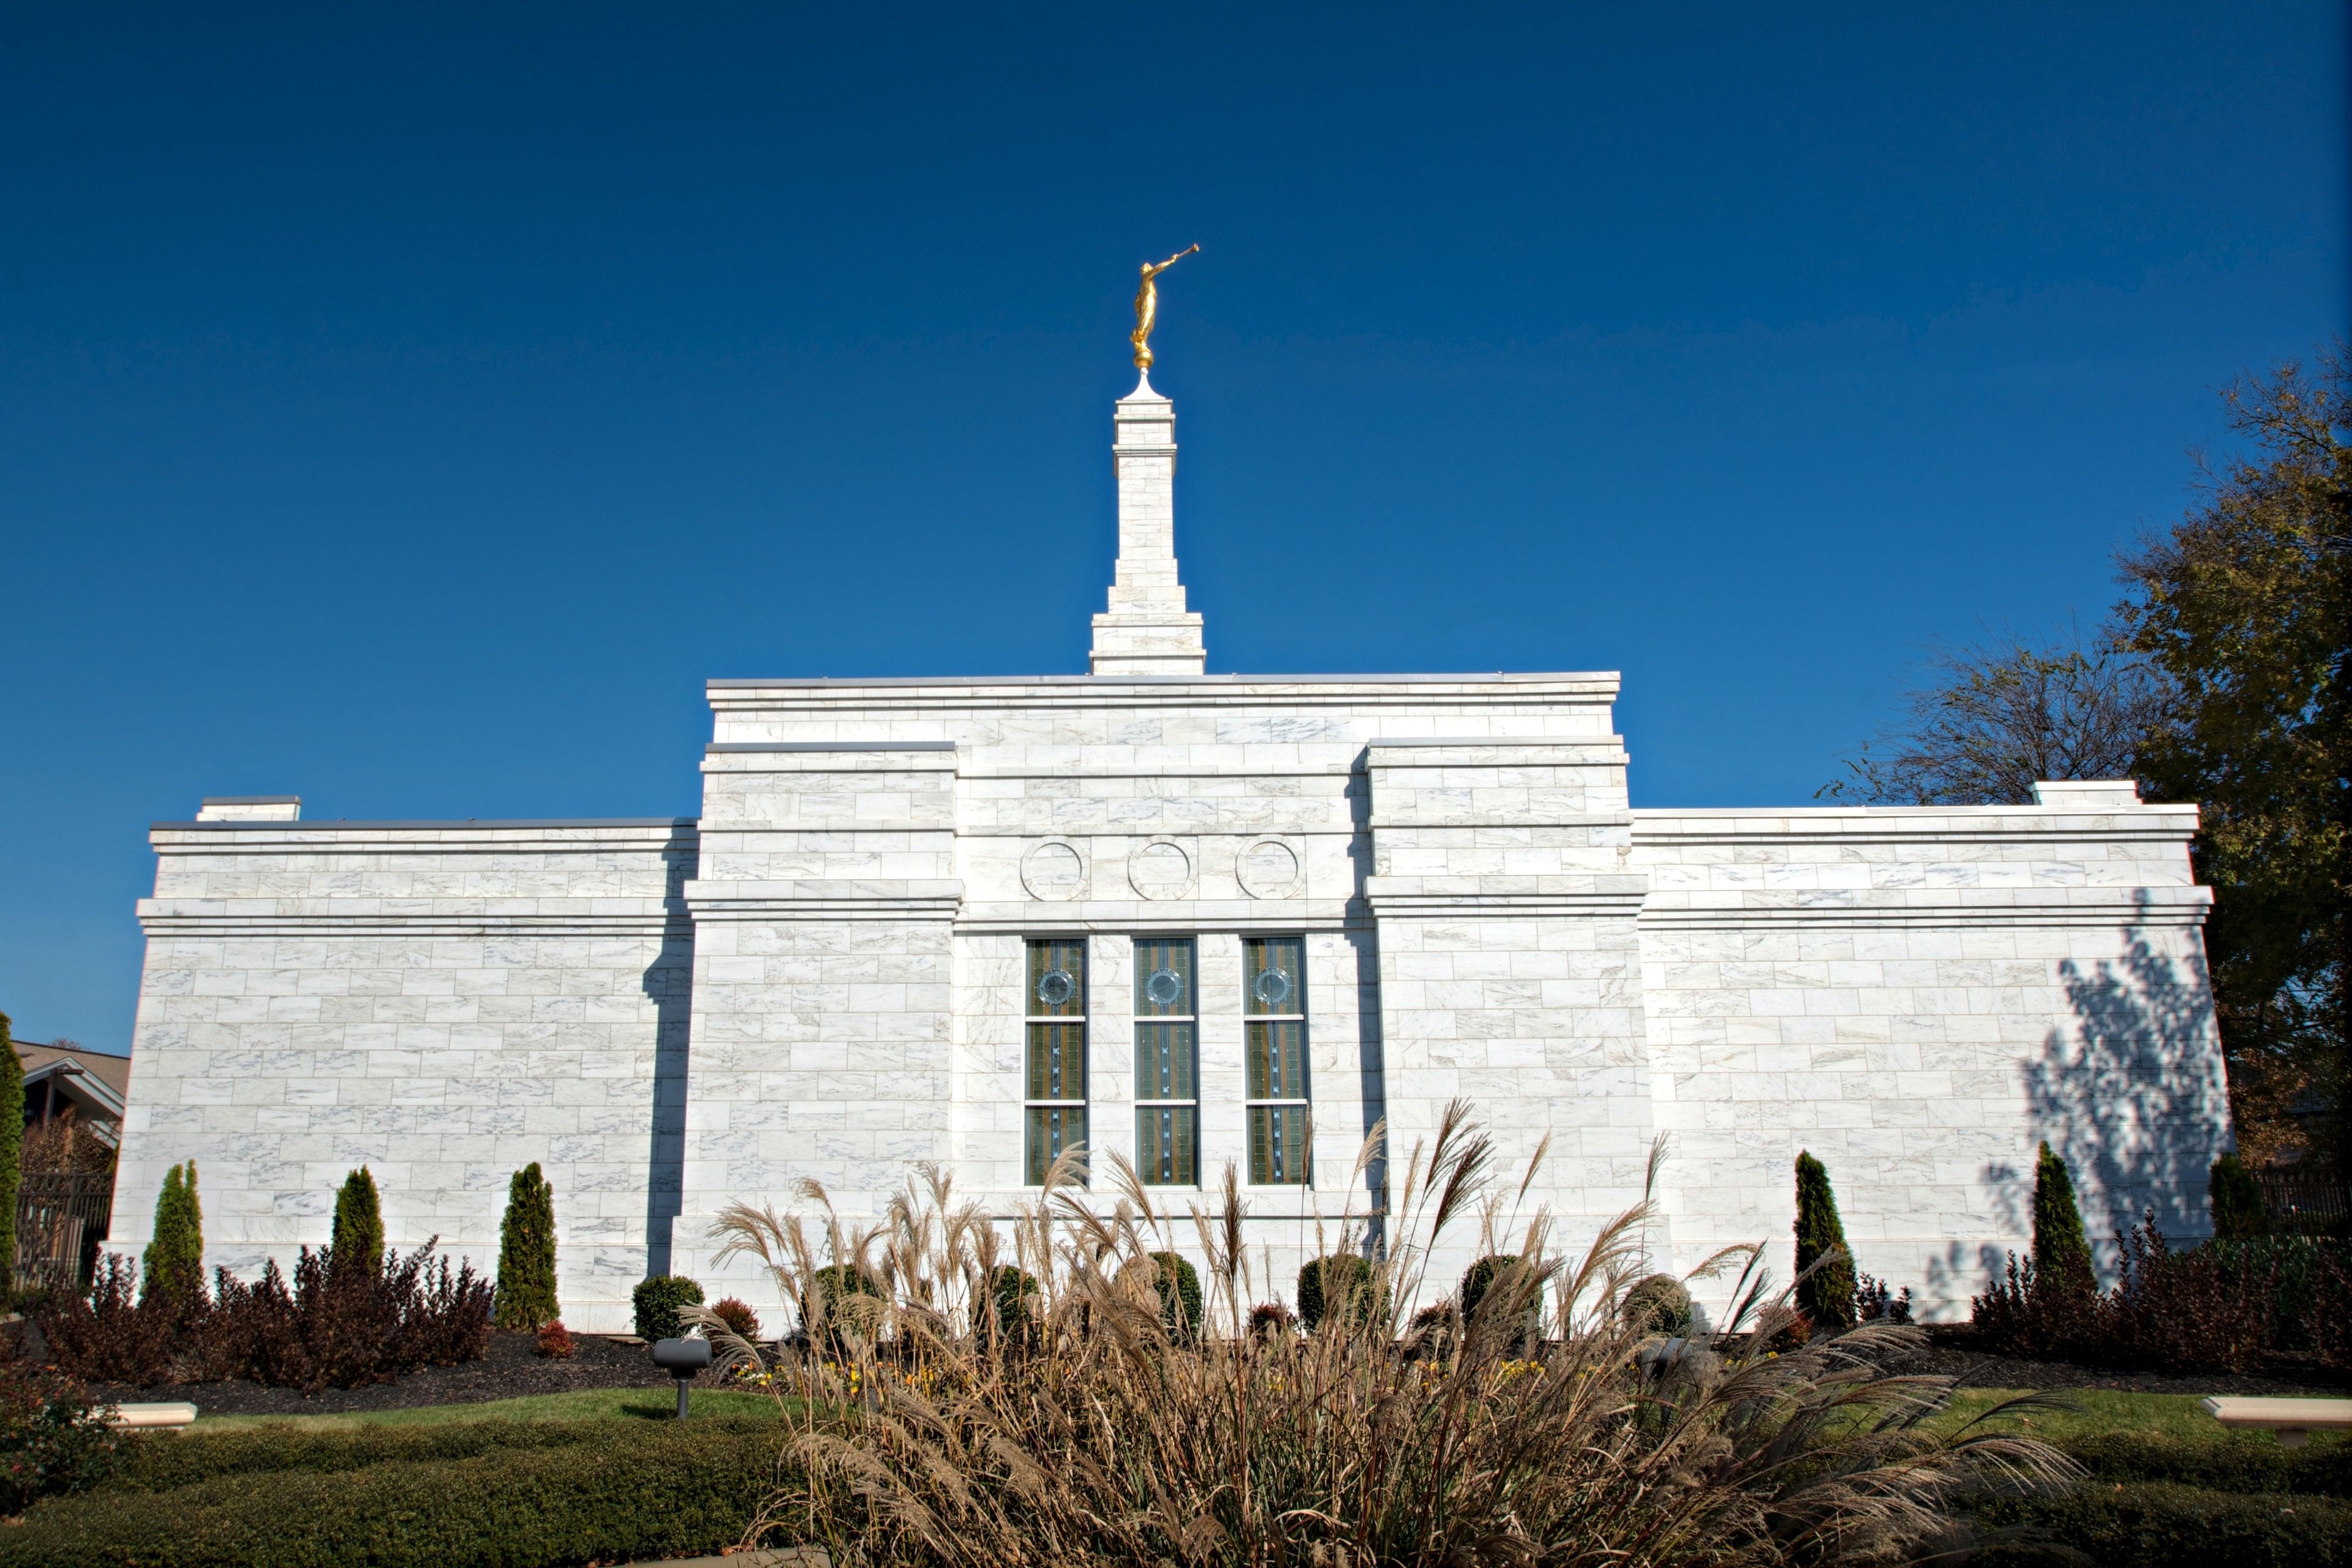 The Nashville Tennessee Temple side view, including scenery and the exterior of the temple.